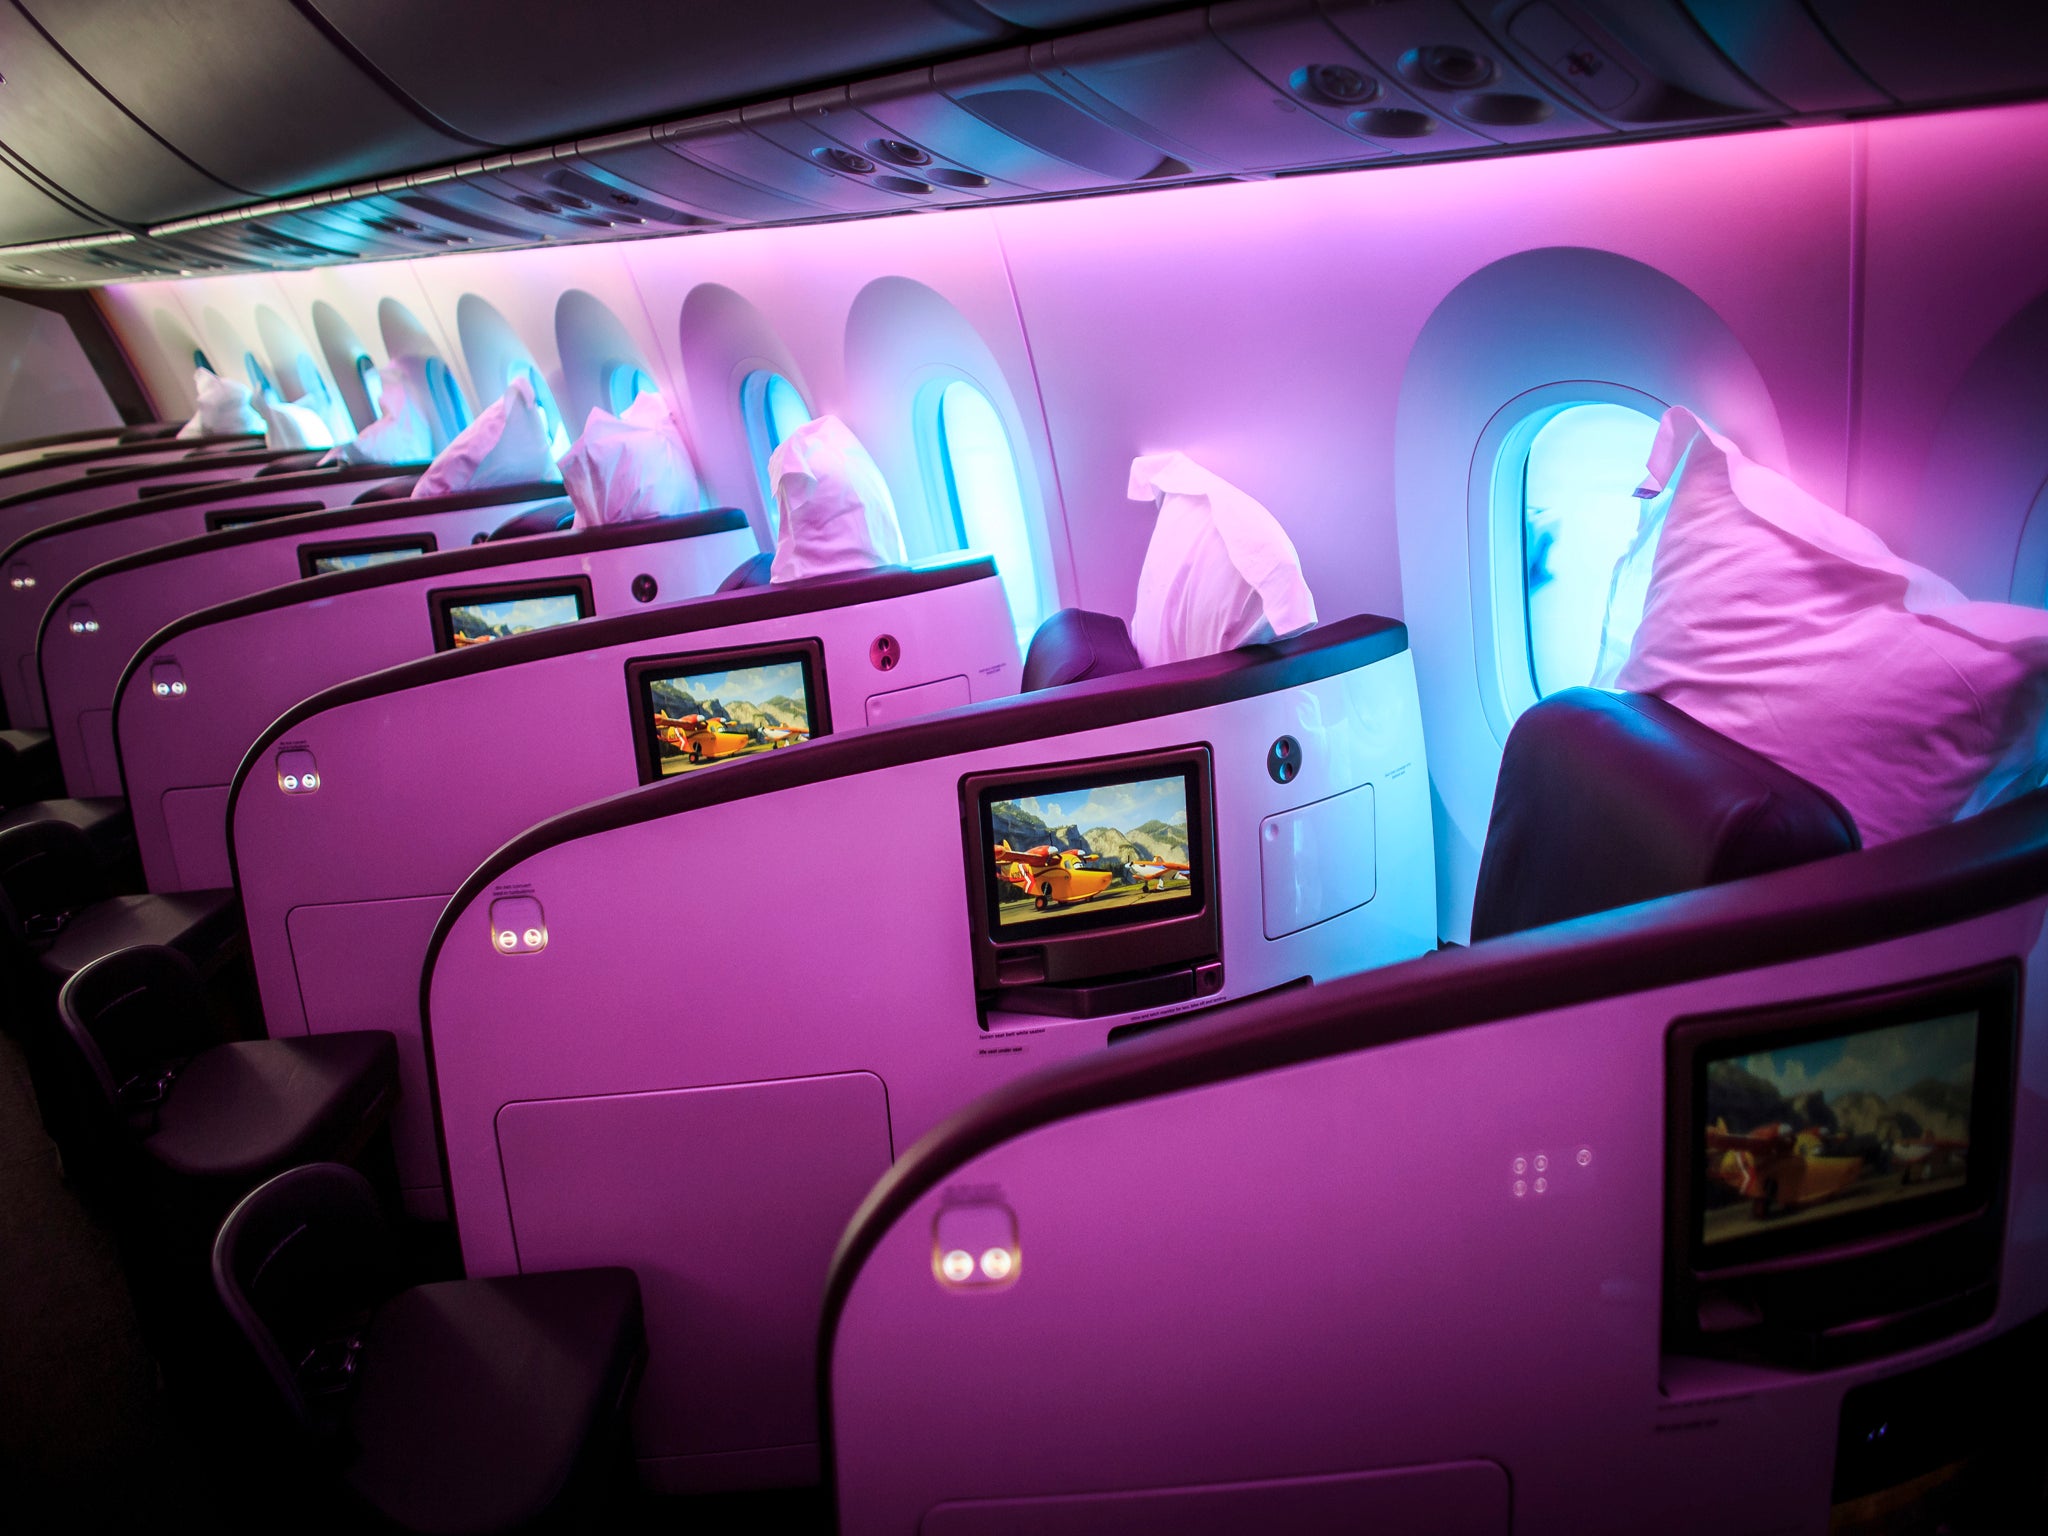 Maybe you could fake a birthday to get into Virgin Atlantic's Upper Class?